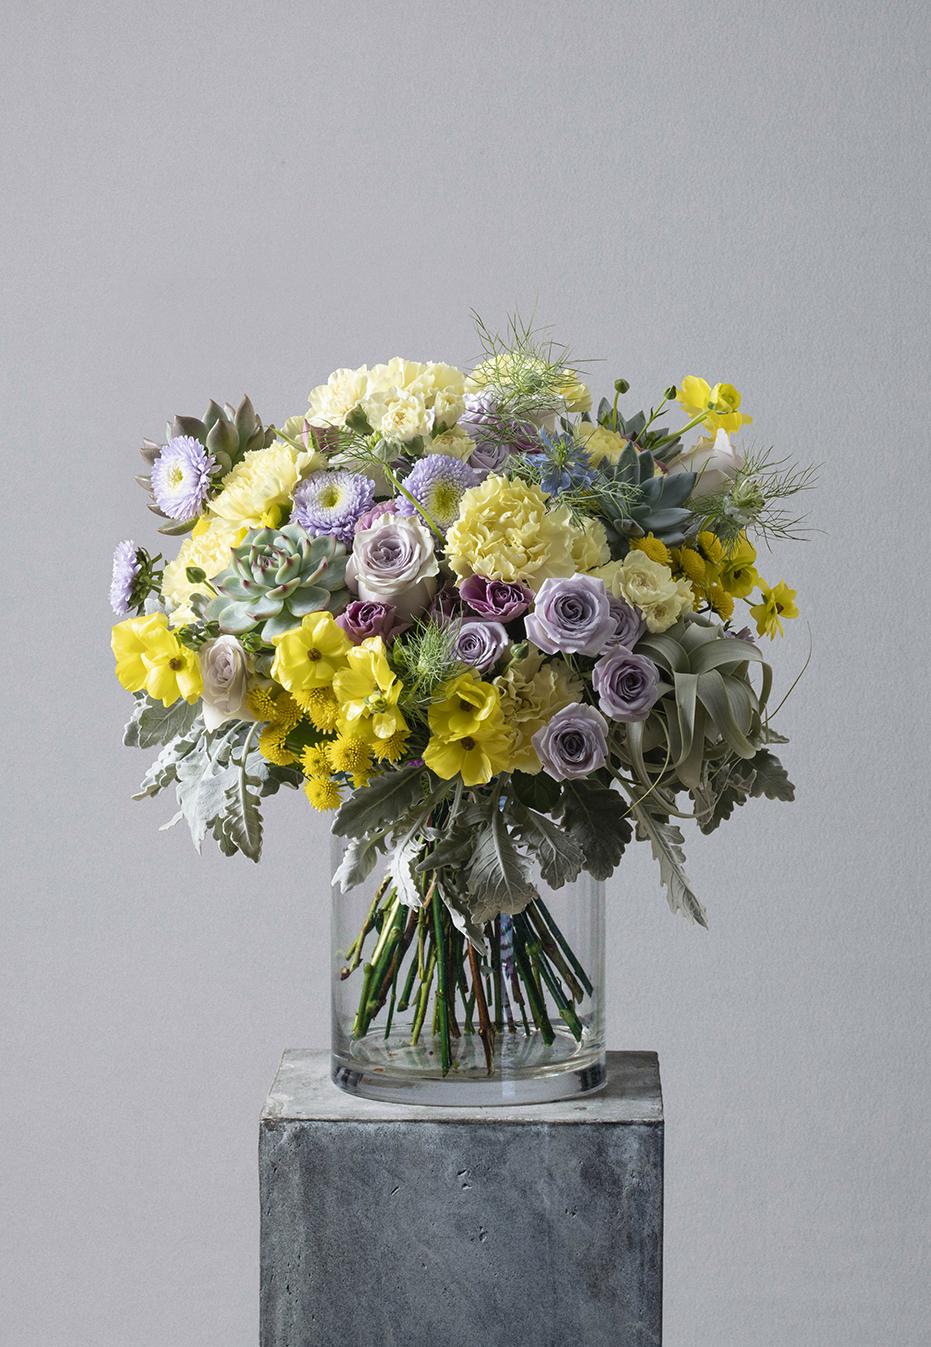  flower bouquet of carnation and ranunculus by flannel flowers